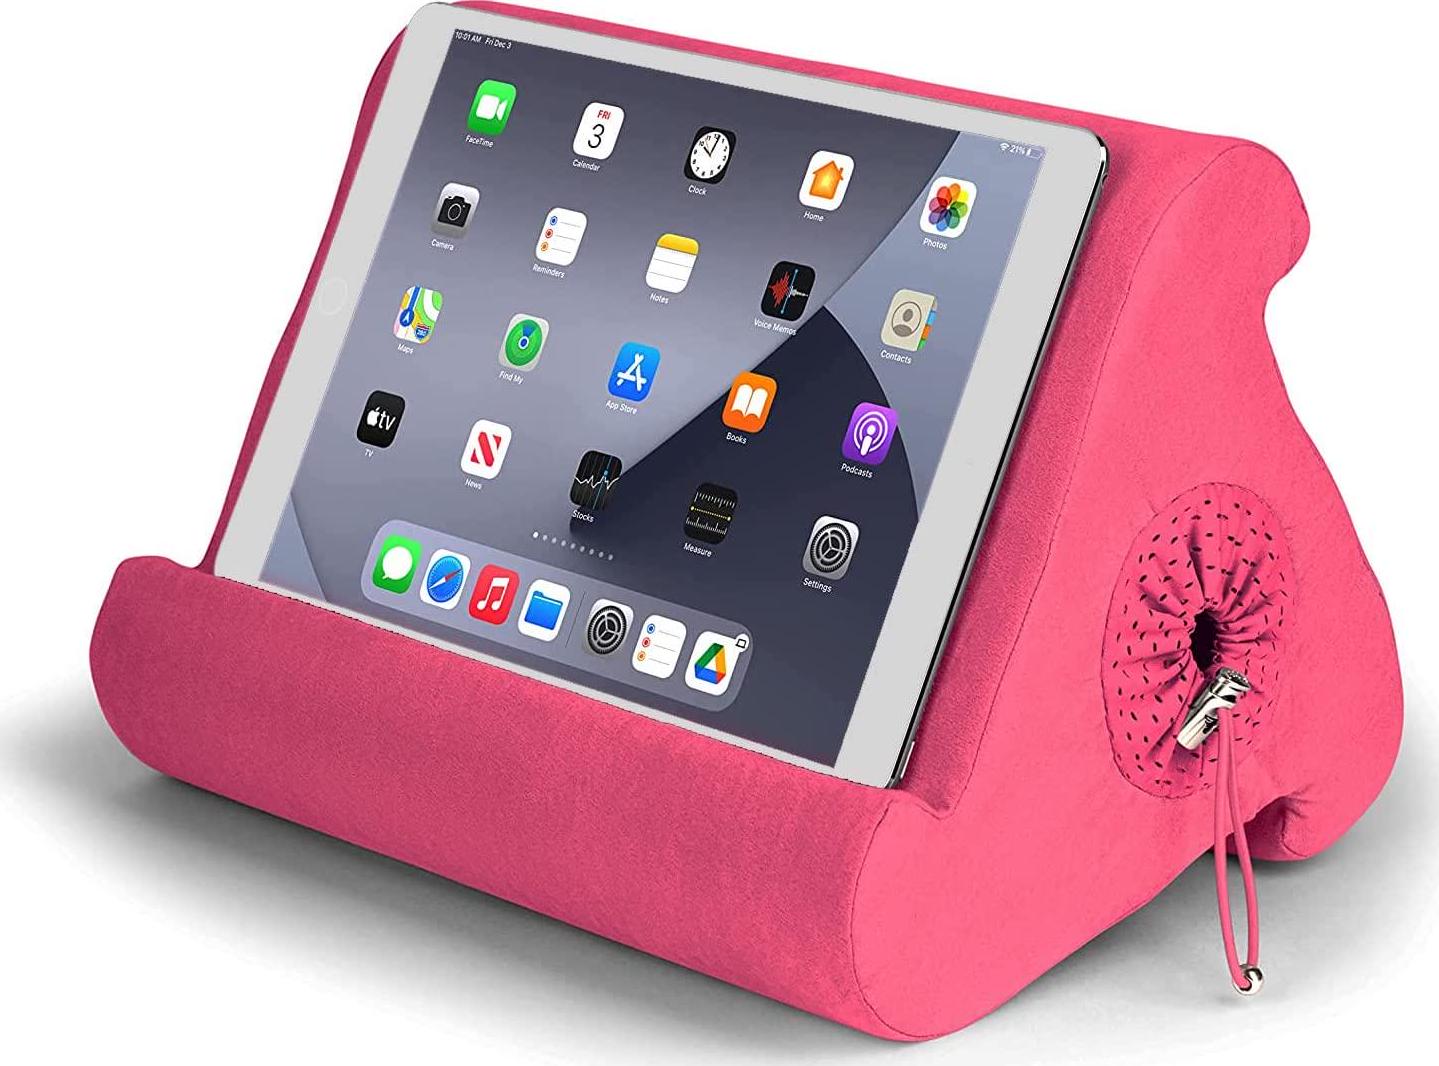 Flippy, Flippy Multi-Angle Soft Pillow Lap Stand for iPads, Tablets, eReaders, Smartphones, Books, Magazines, Pink